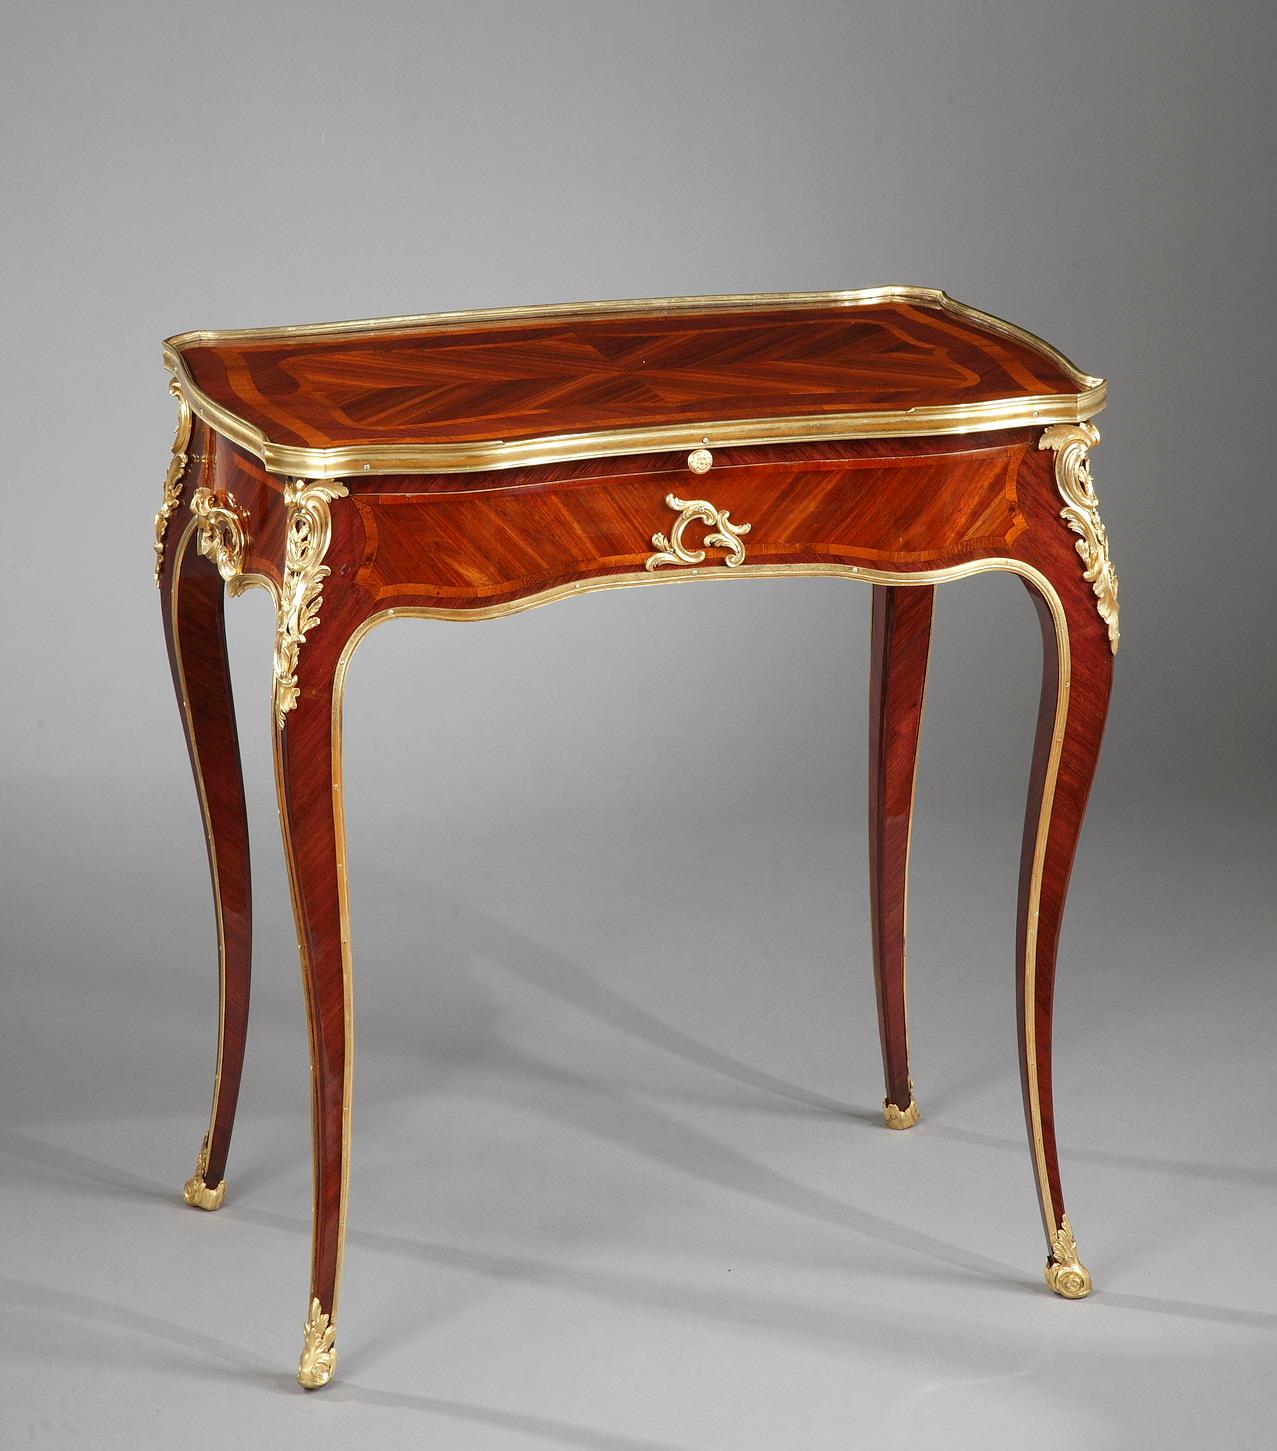 Charming Louis XV style reading table attributed to H. Dasson. It opens on one side by a compartmental drawer and by a sliding shelf, forming a writing board and being able to switch to a reading position. Its tray in veneered wood is circled by a